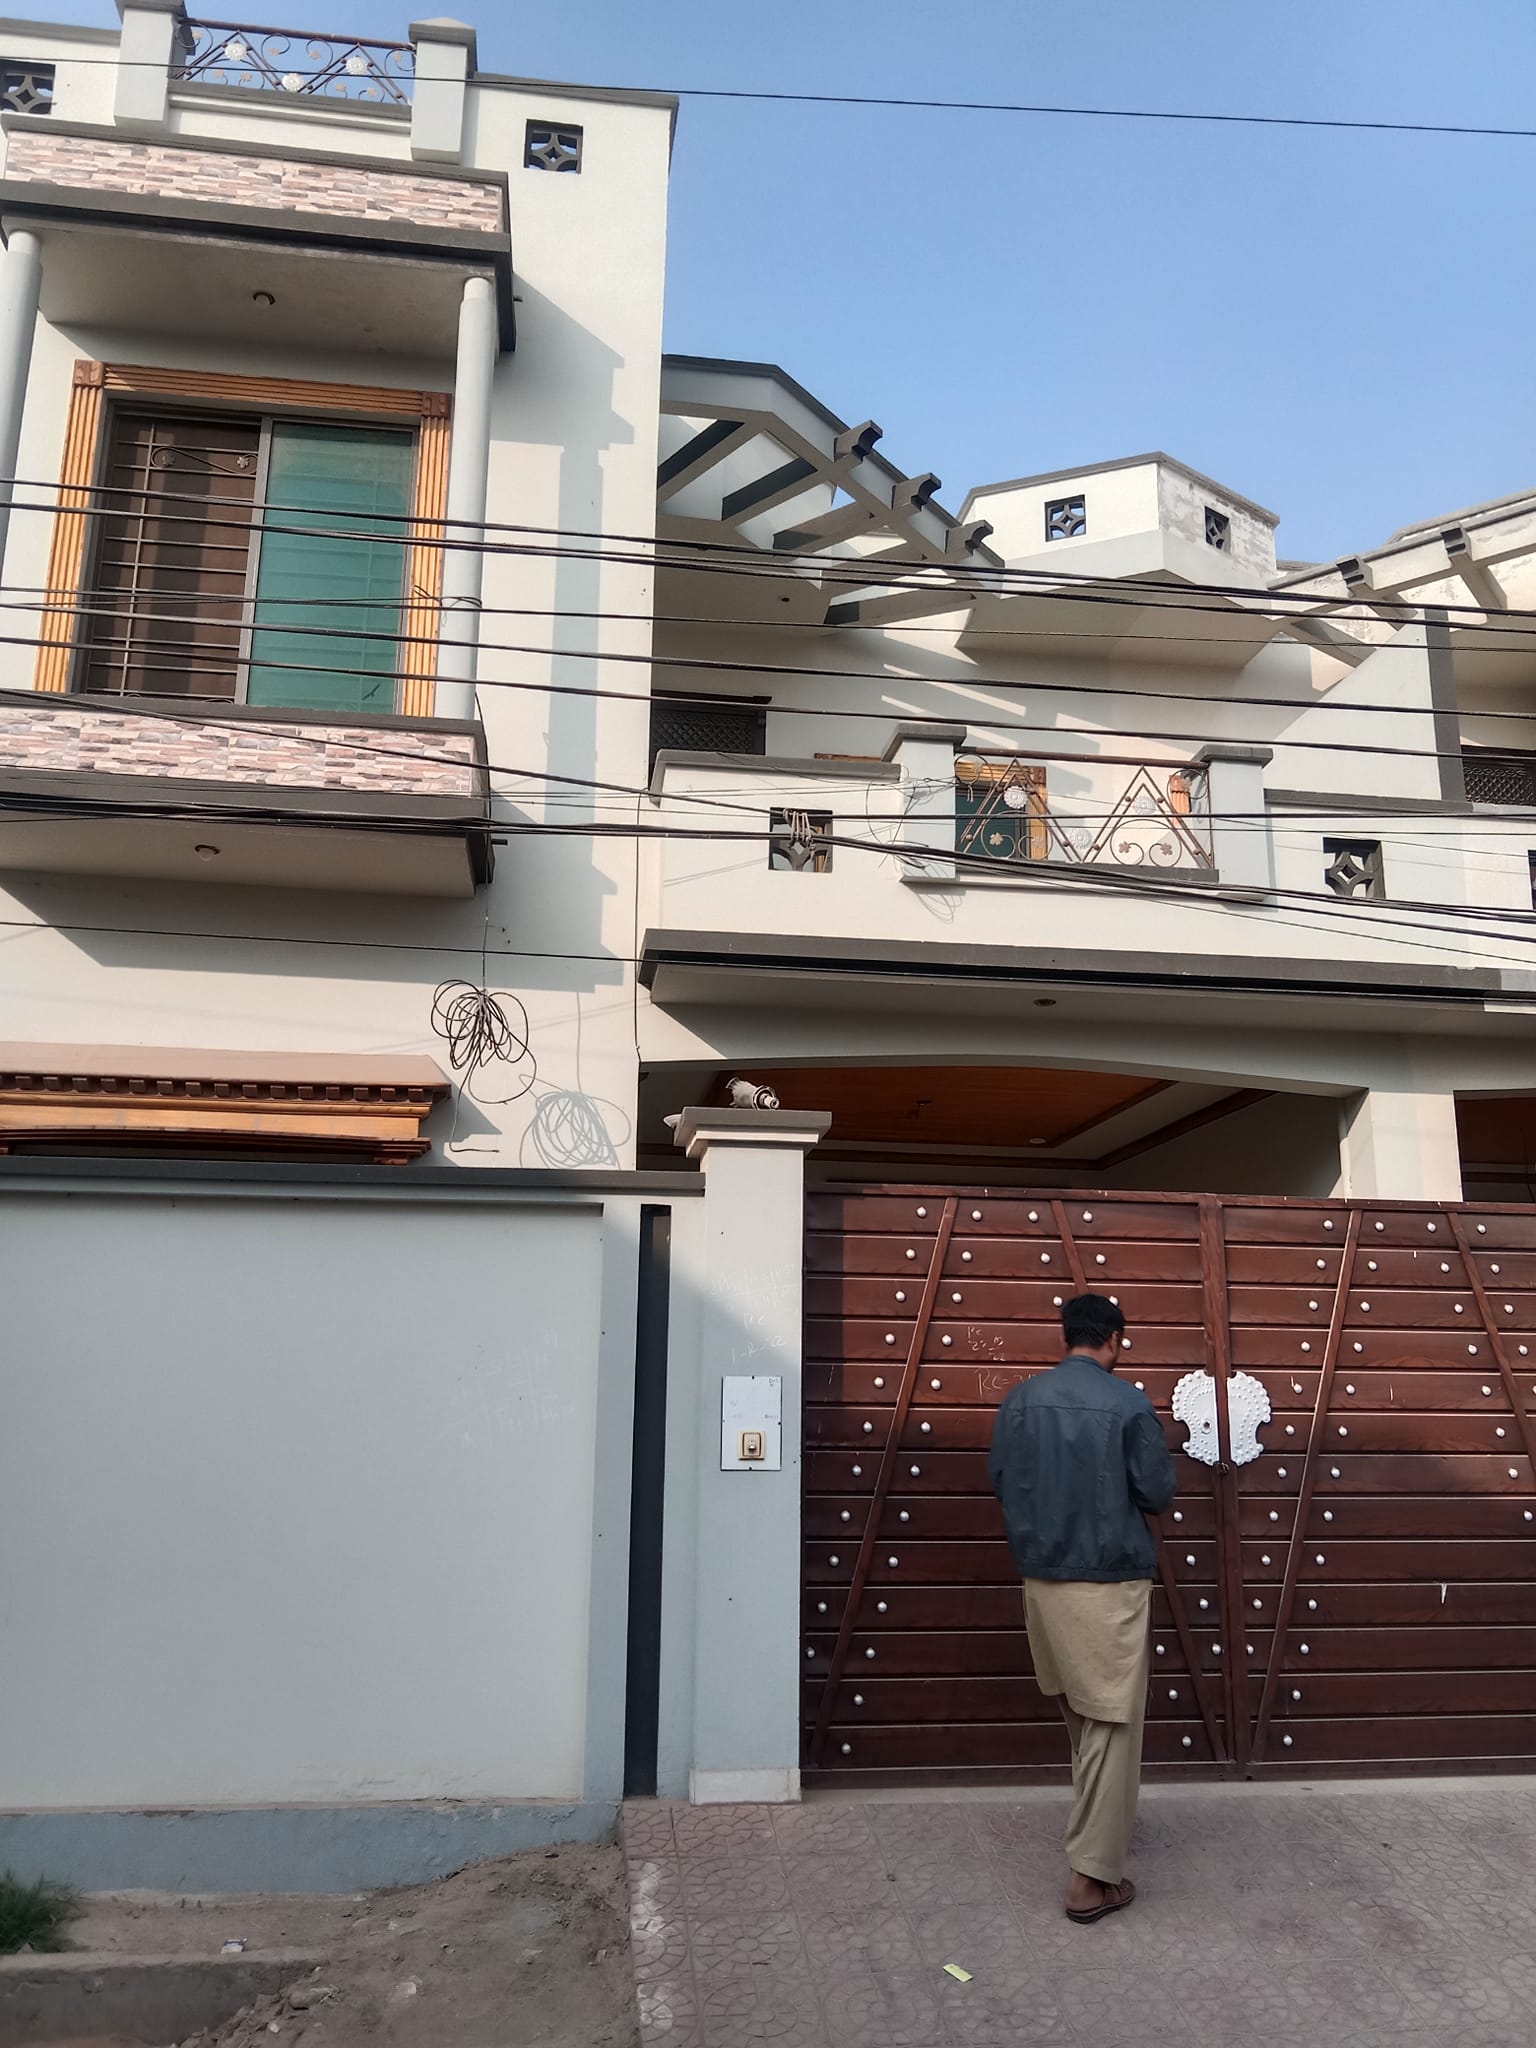 5 Marla House For Rent in Street No 15 Shalimar Colony Multan